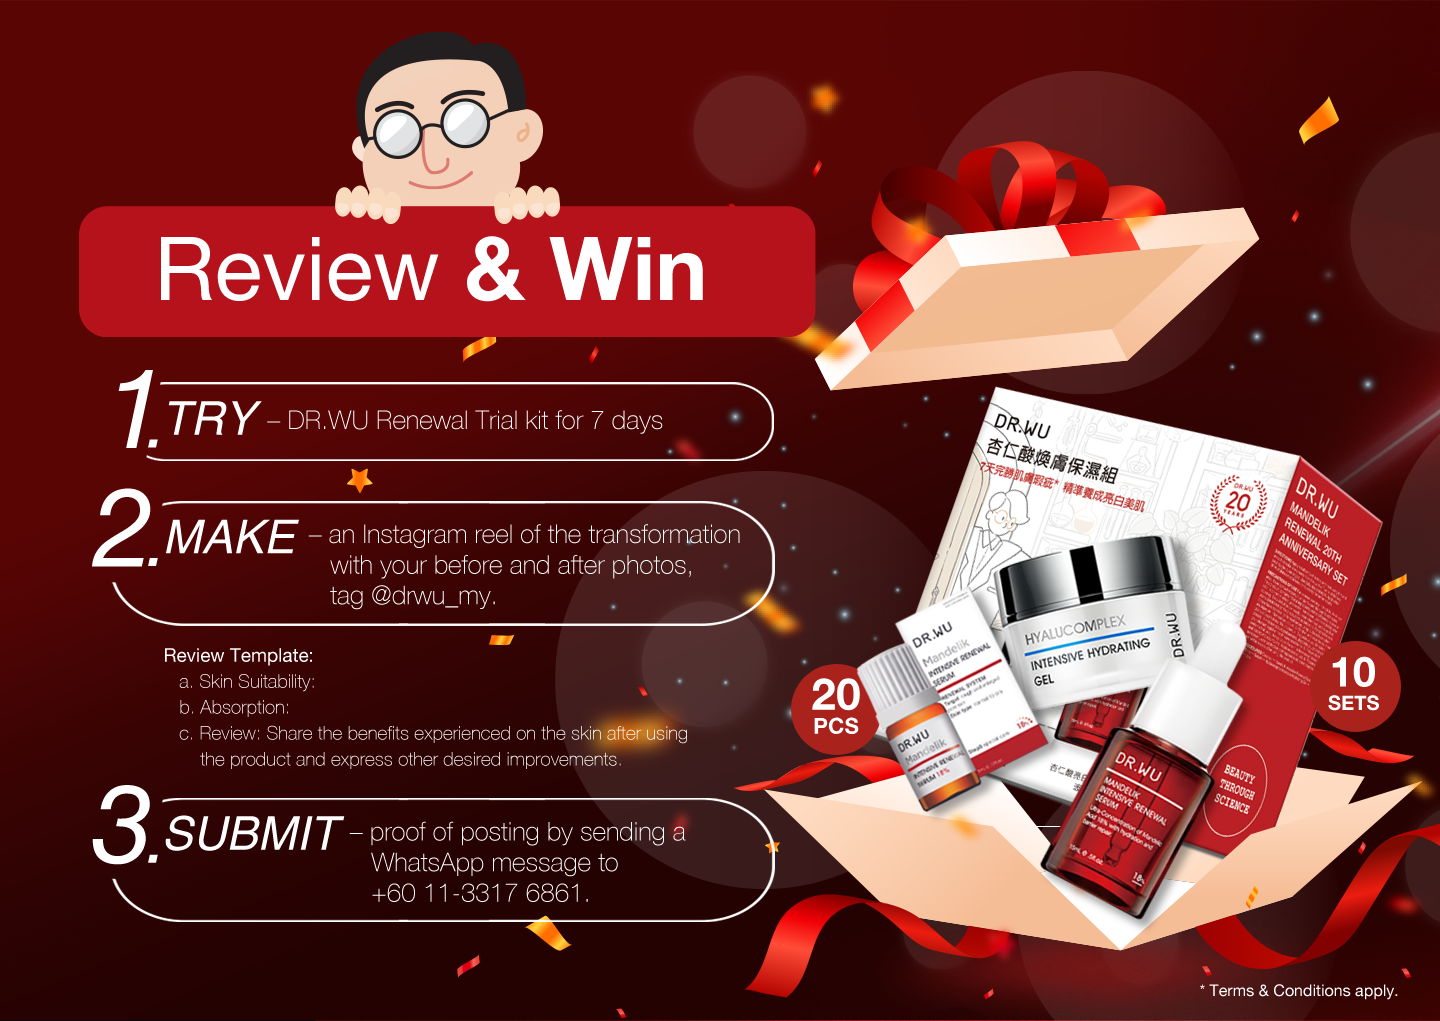 DR.WU Review & Win